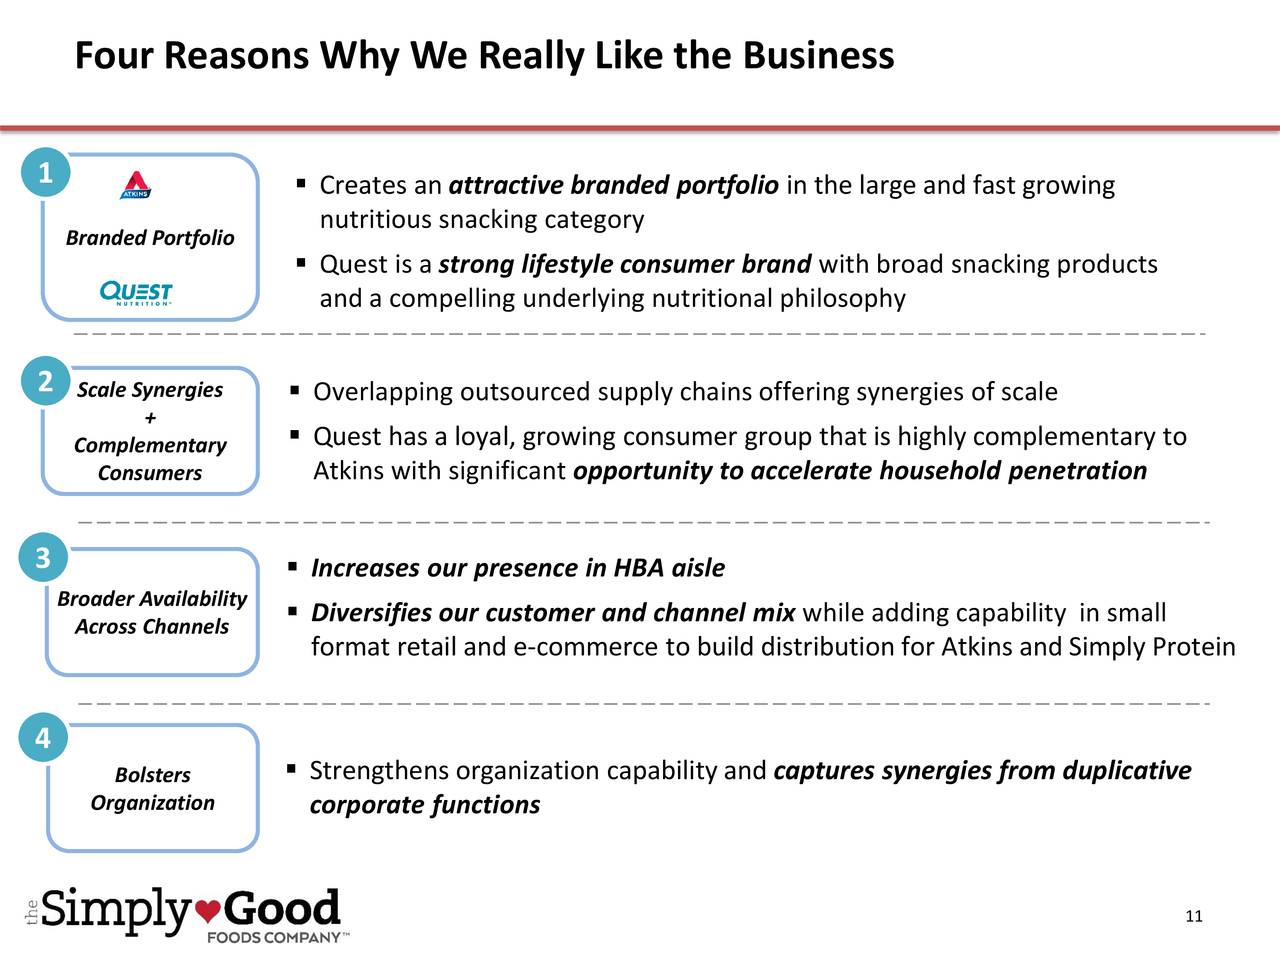 Four Reasons Why We Really Like the Business